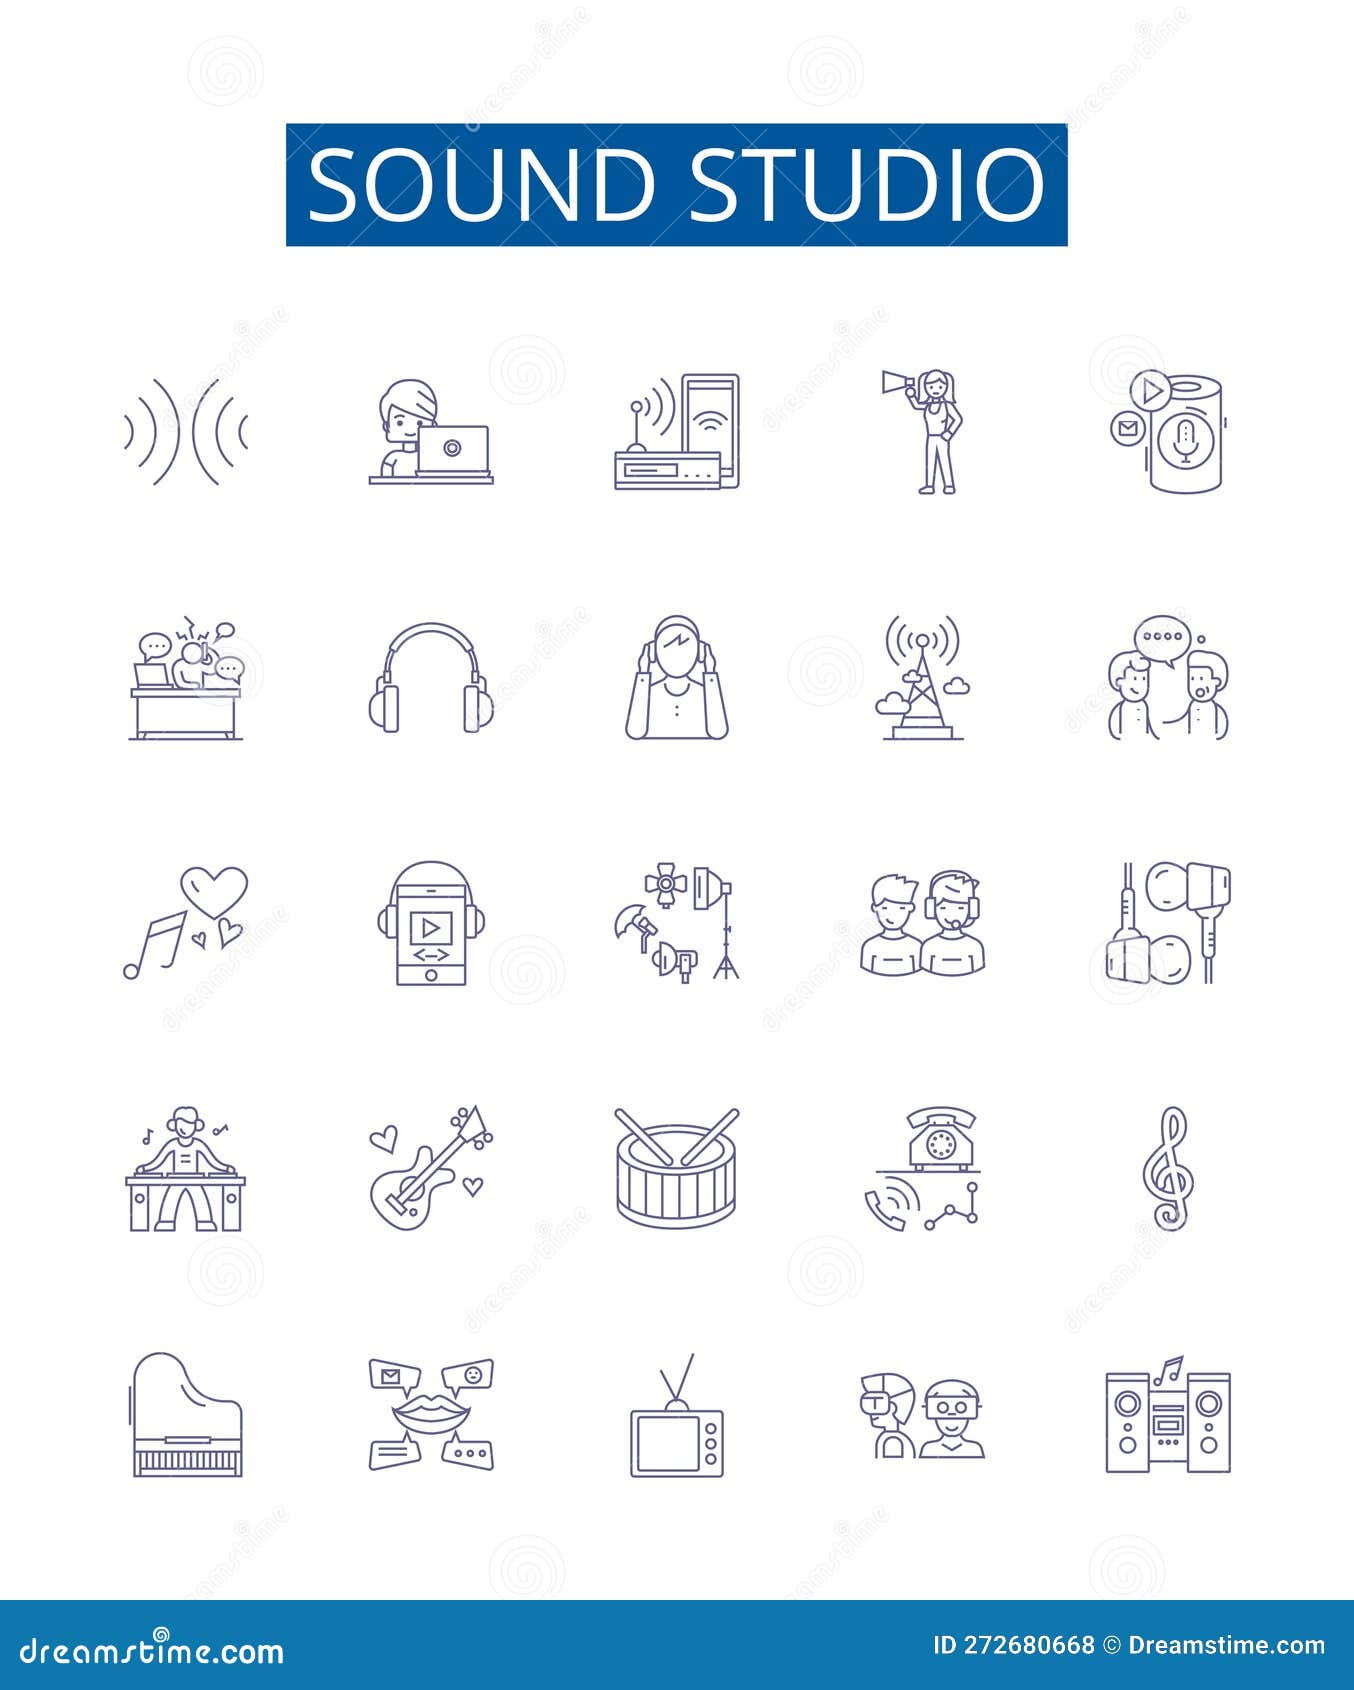 sound studio line icons signs set.  collection of recording, mixing, music, soundstage, microphone, producer